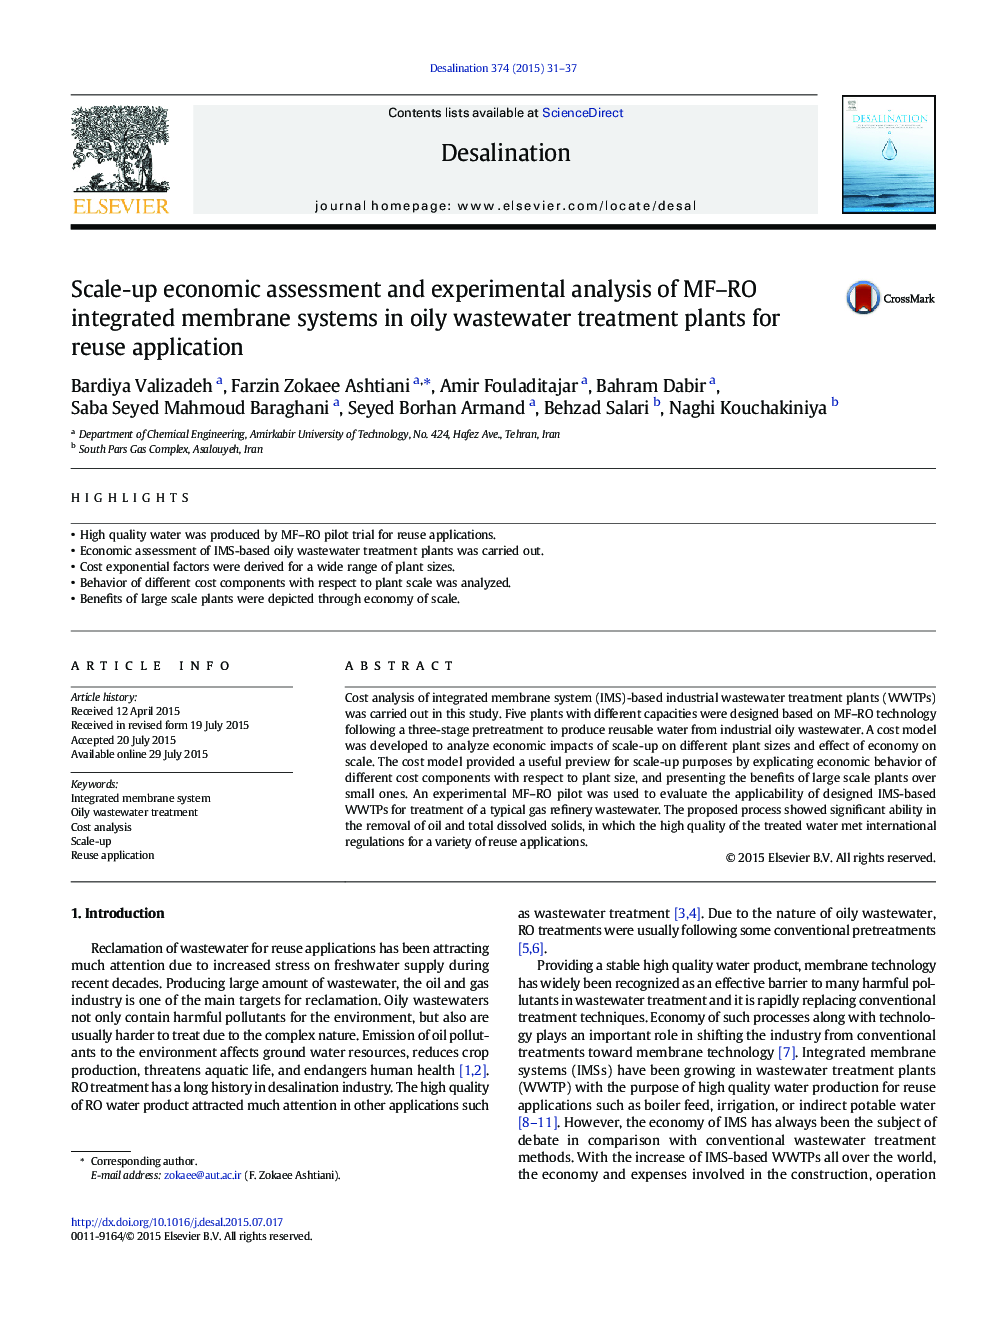 Scale-up economic assessment and experimental analysis of MF–RO integrated membrane systems in oily wastewater treatment plants for reuse application